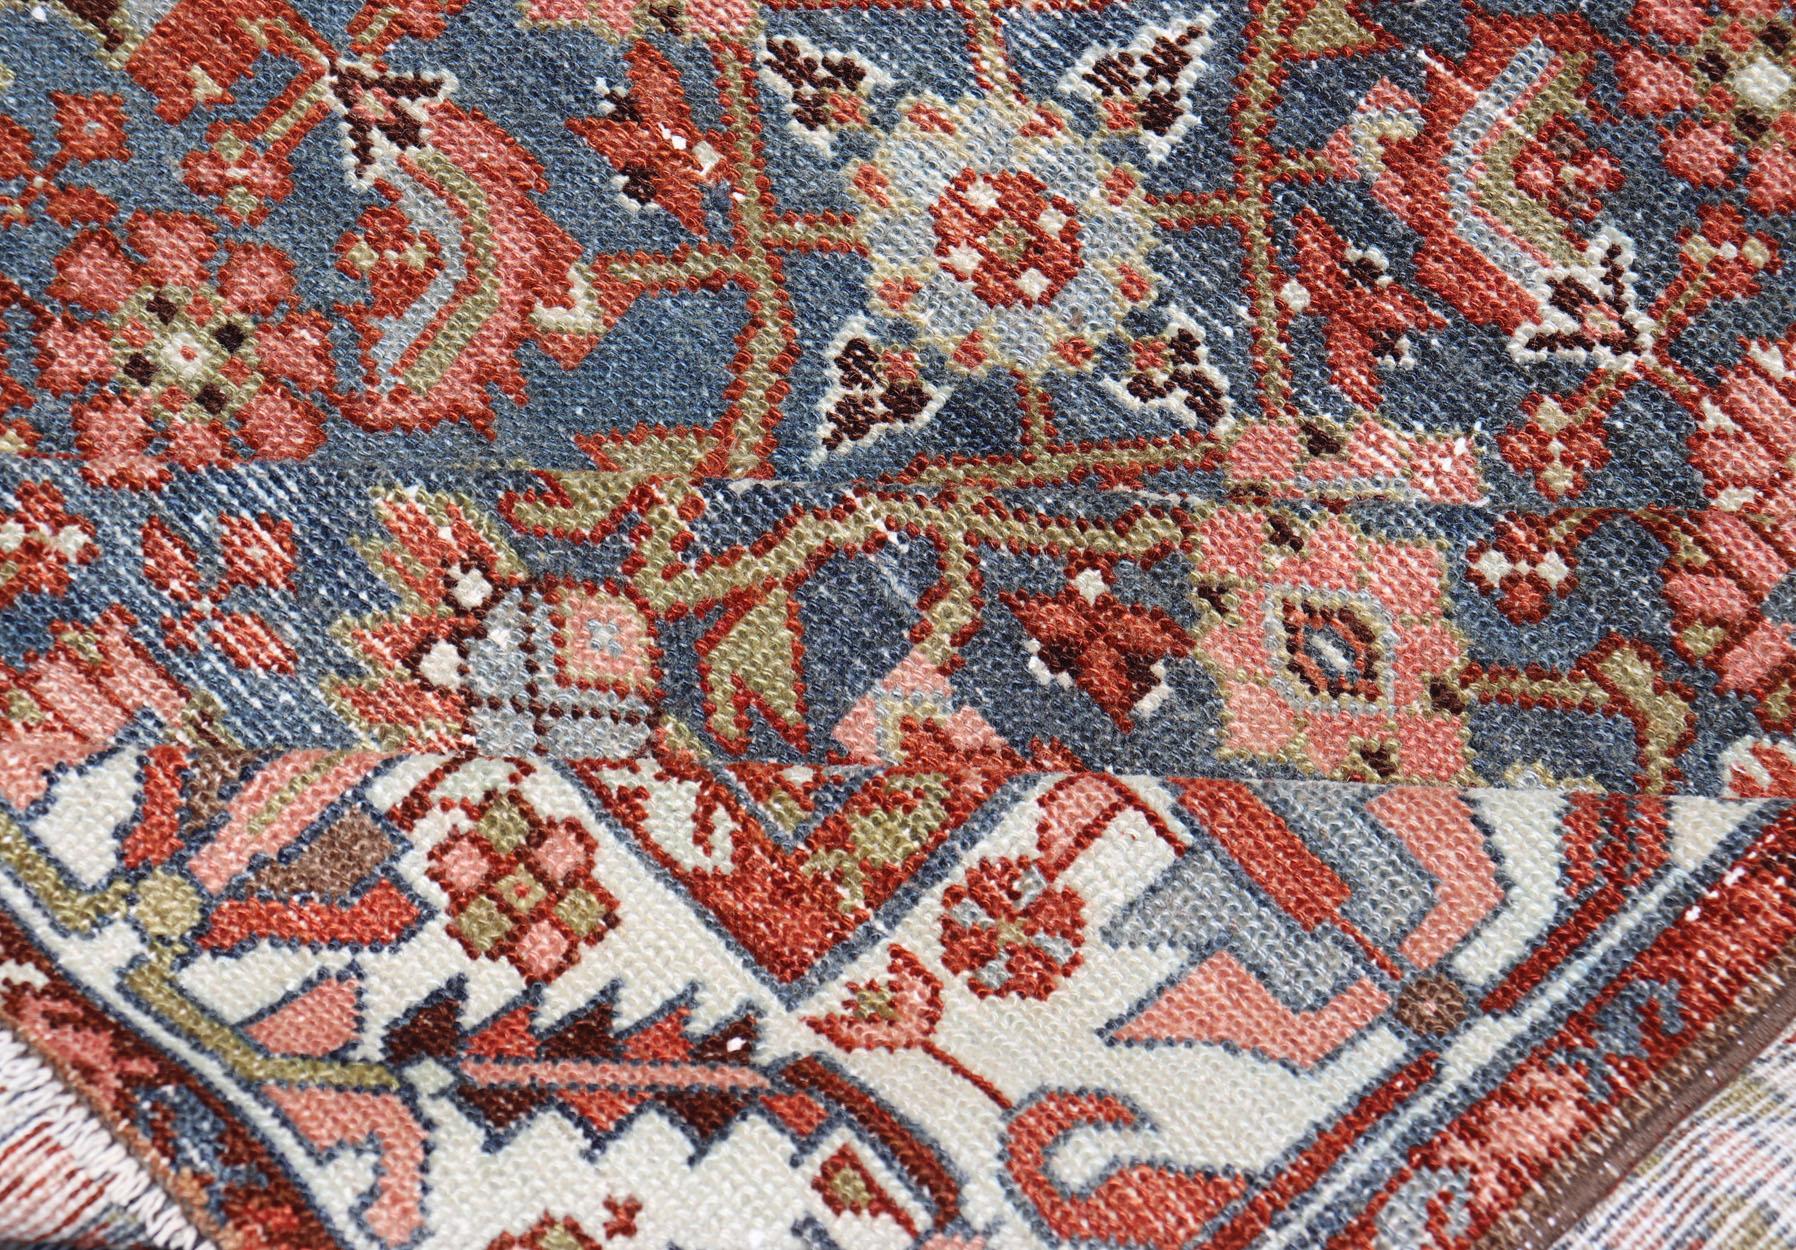 Antique Persian Malayer with All-Over Design in Red, Olive, and Blue 6